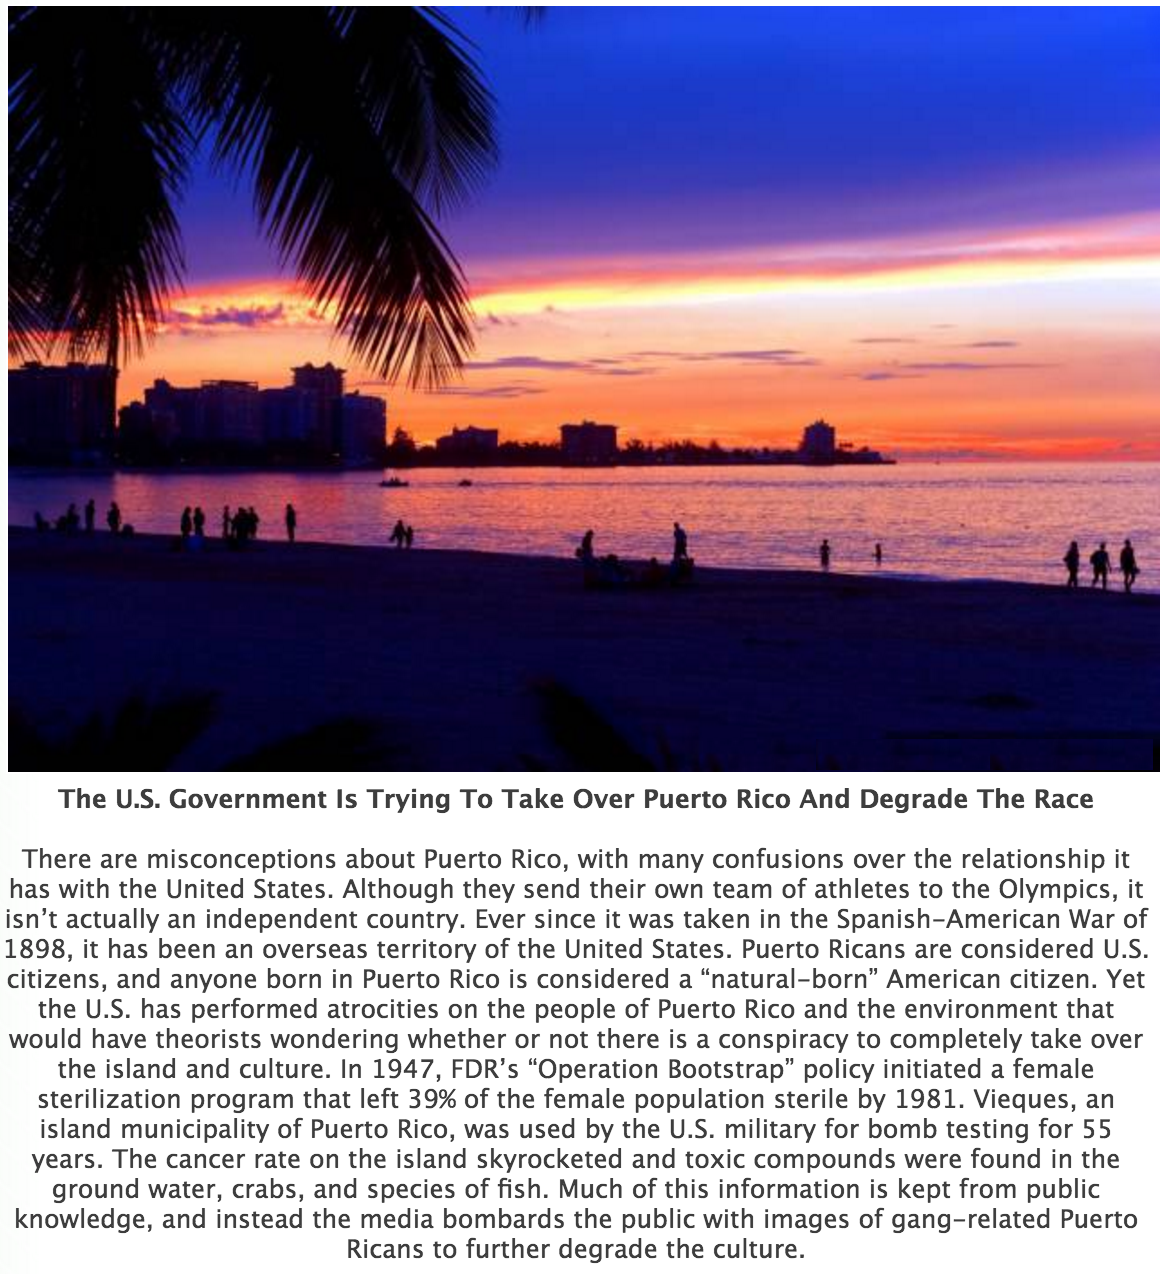 san juan puerto rico sunset - The U.S. Government is Trying To Take Over Puerto Rico And Degrade The Race There are misconceptions about Puerto Rico, with many confusions over the relationship it has with the United States. Although they send their own te